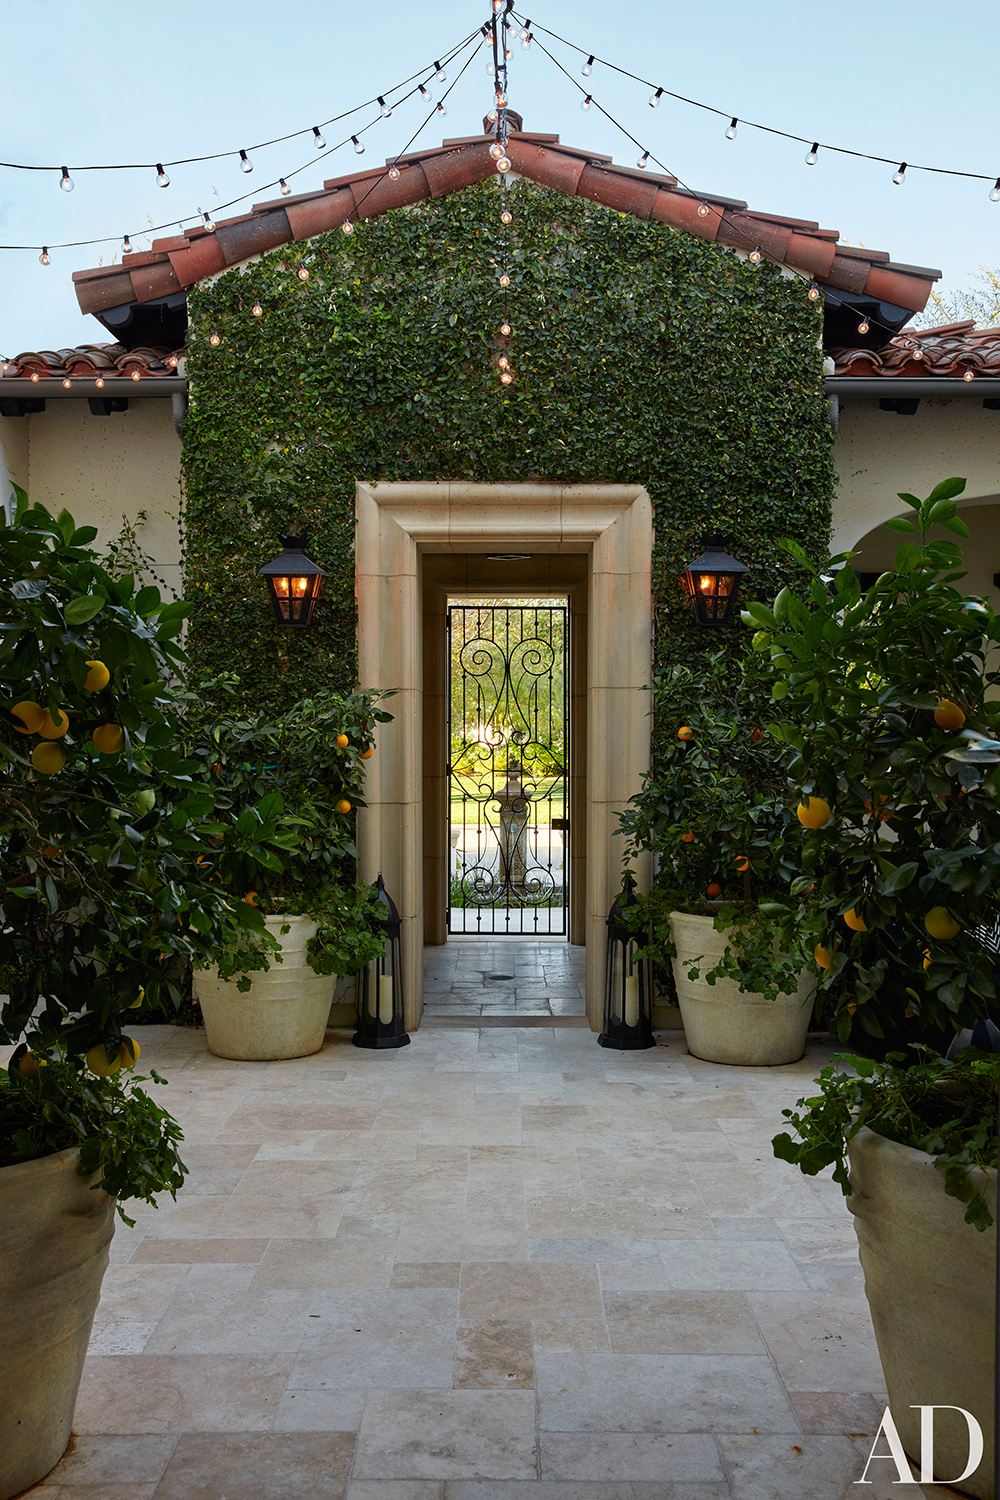 The courtyard at Khloe's house.